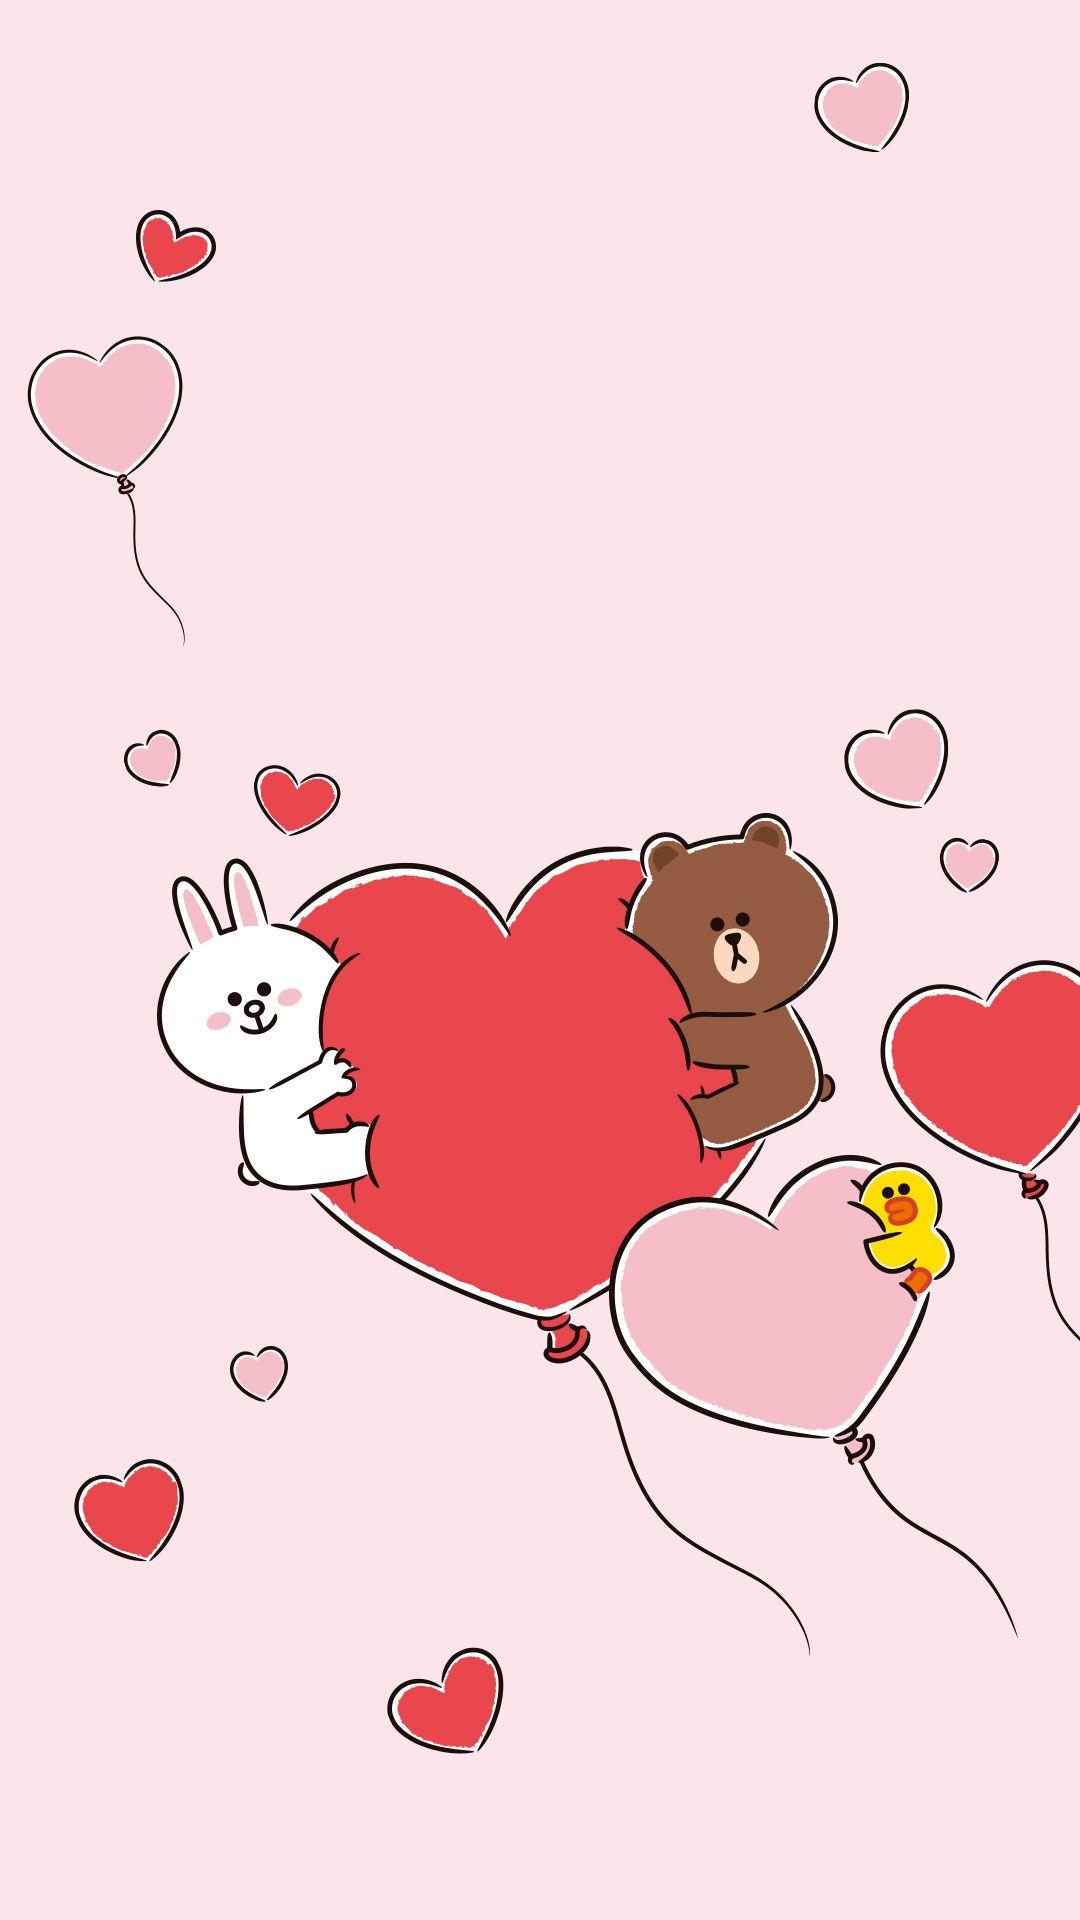 LINEFRIENDS PIC. GIFs, pics and wallpaper by LINE friends. Line friends, Bear wallpaper, Cute cartoon wallpaper